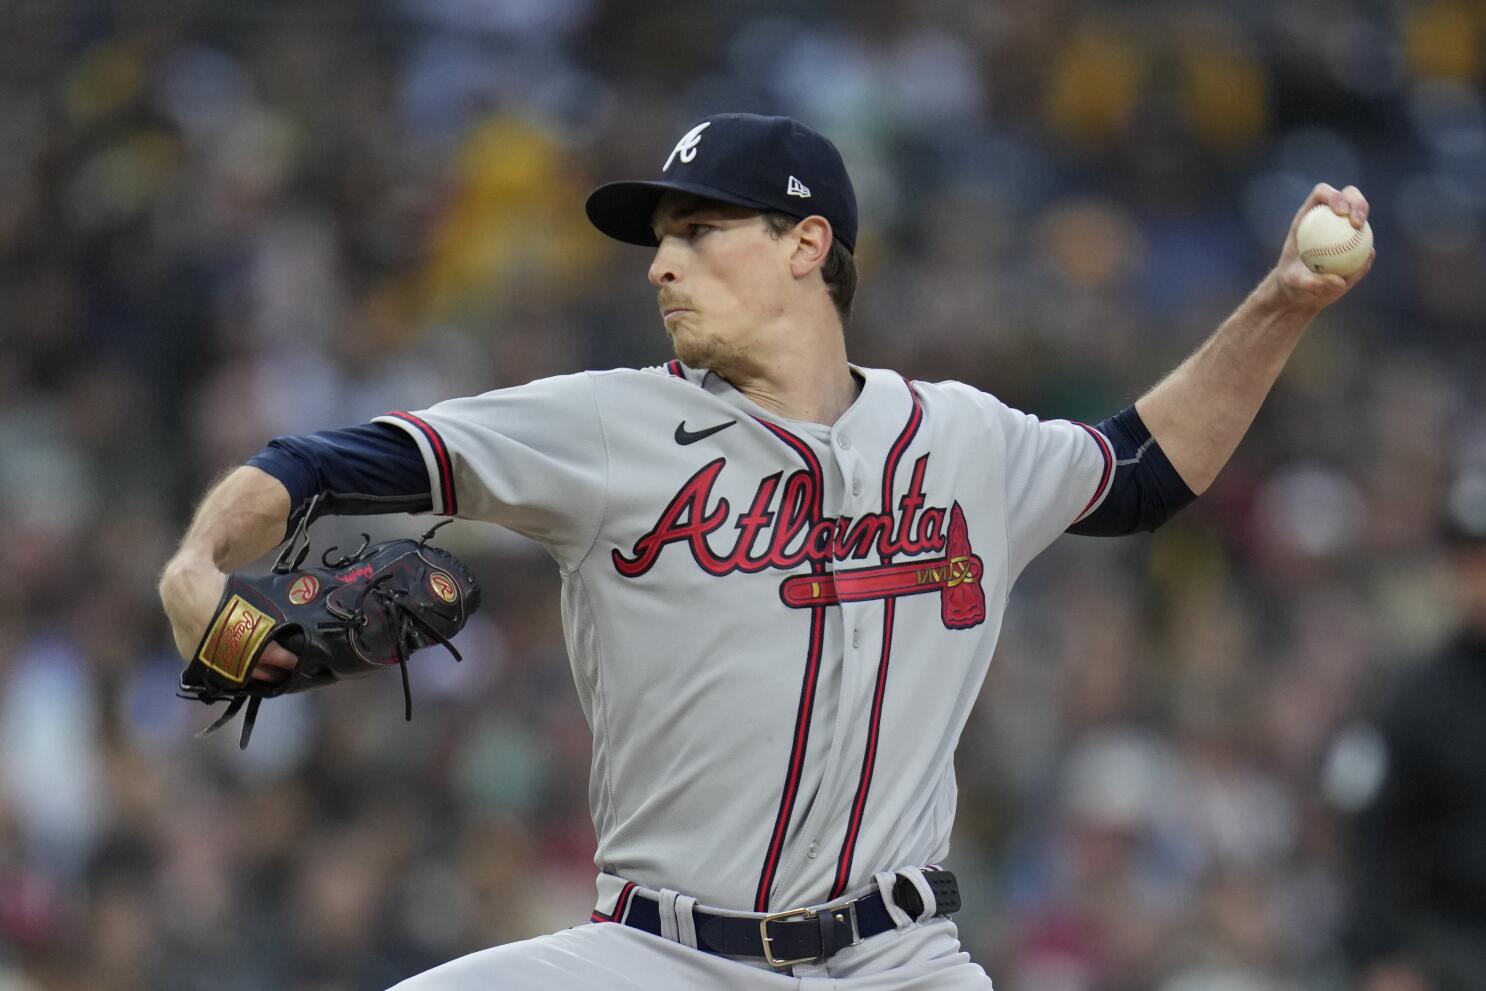 Braves activate Fried off IL to start against Padres - The San